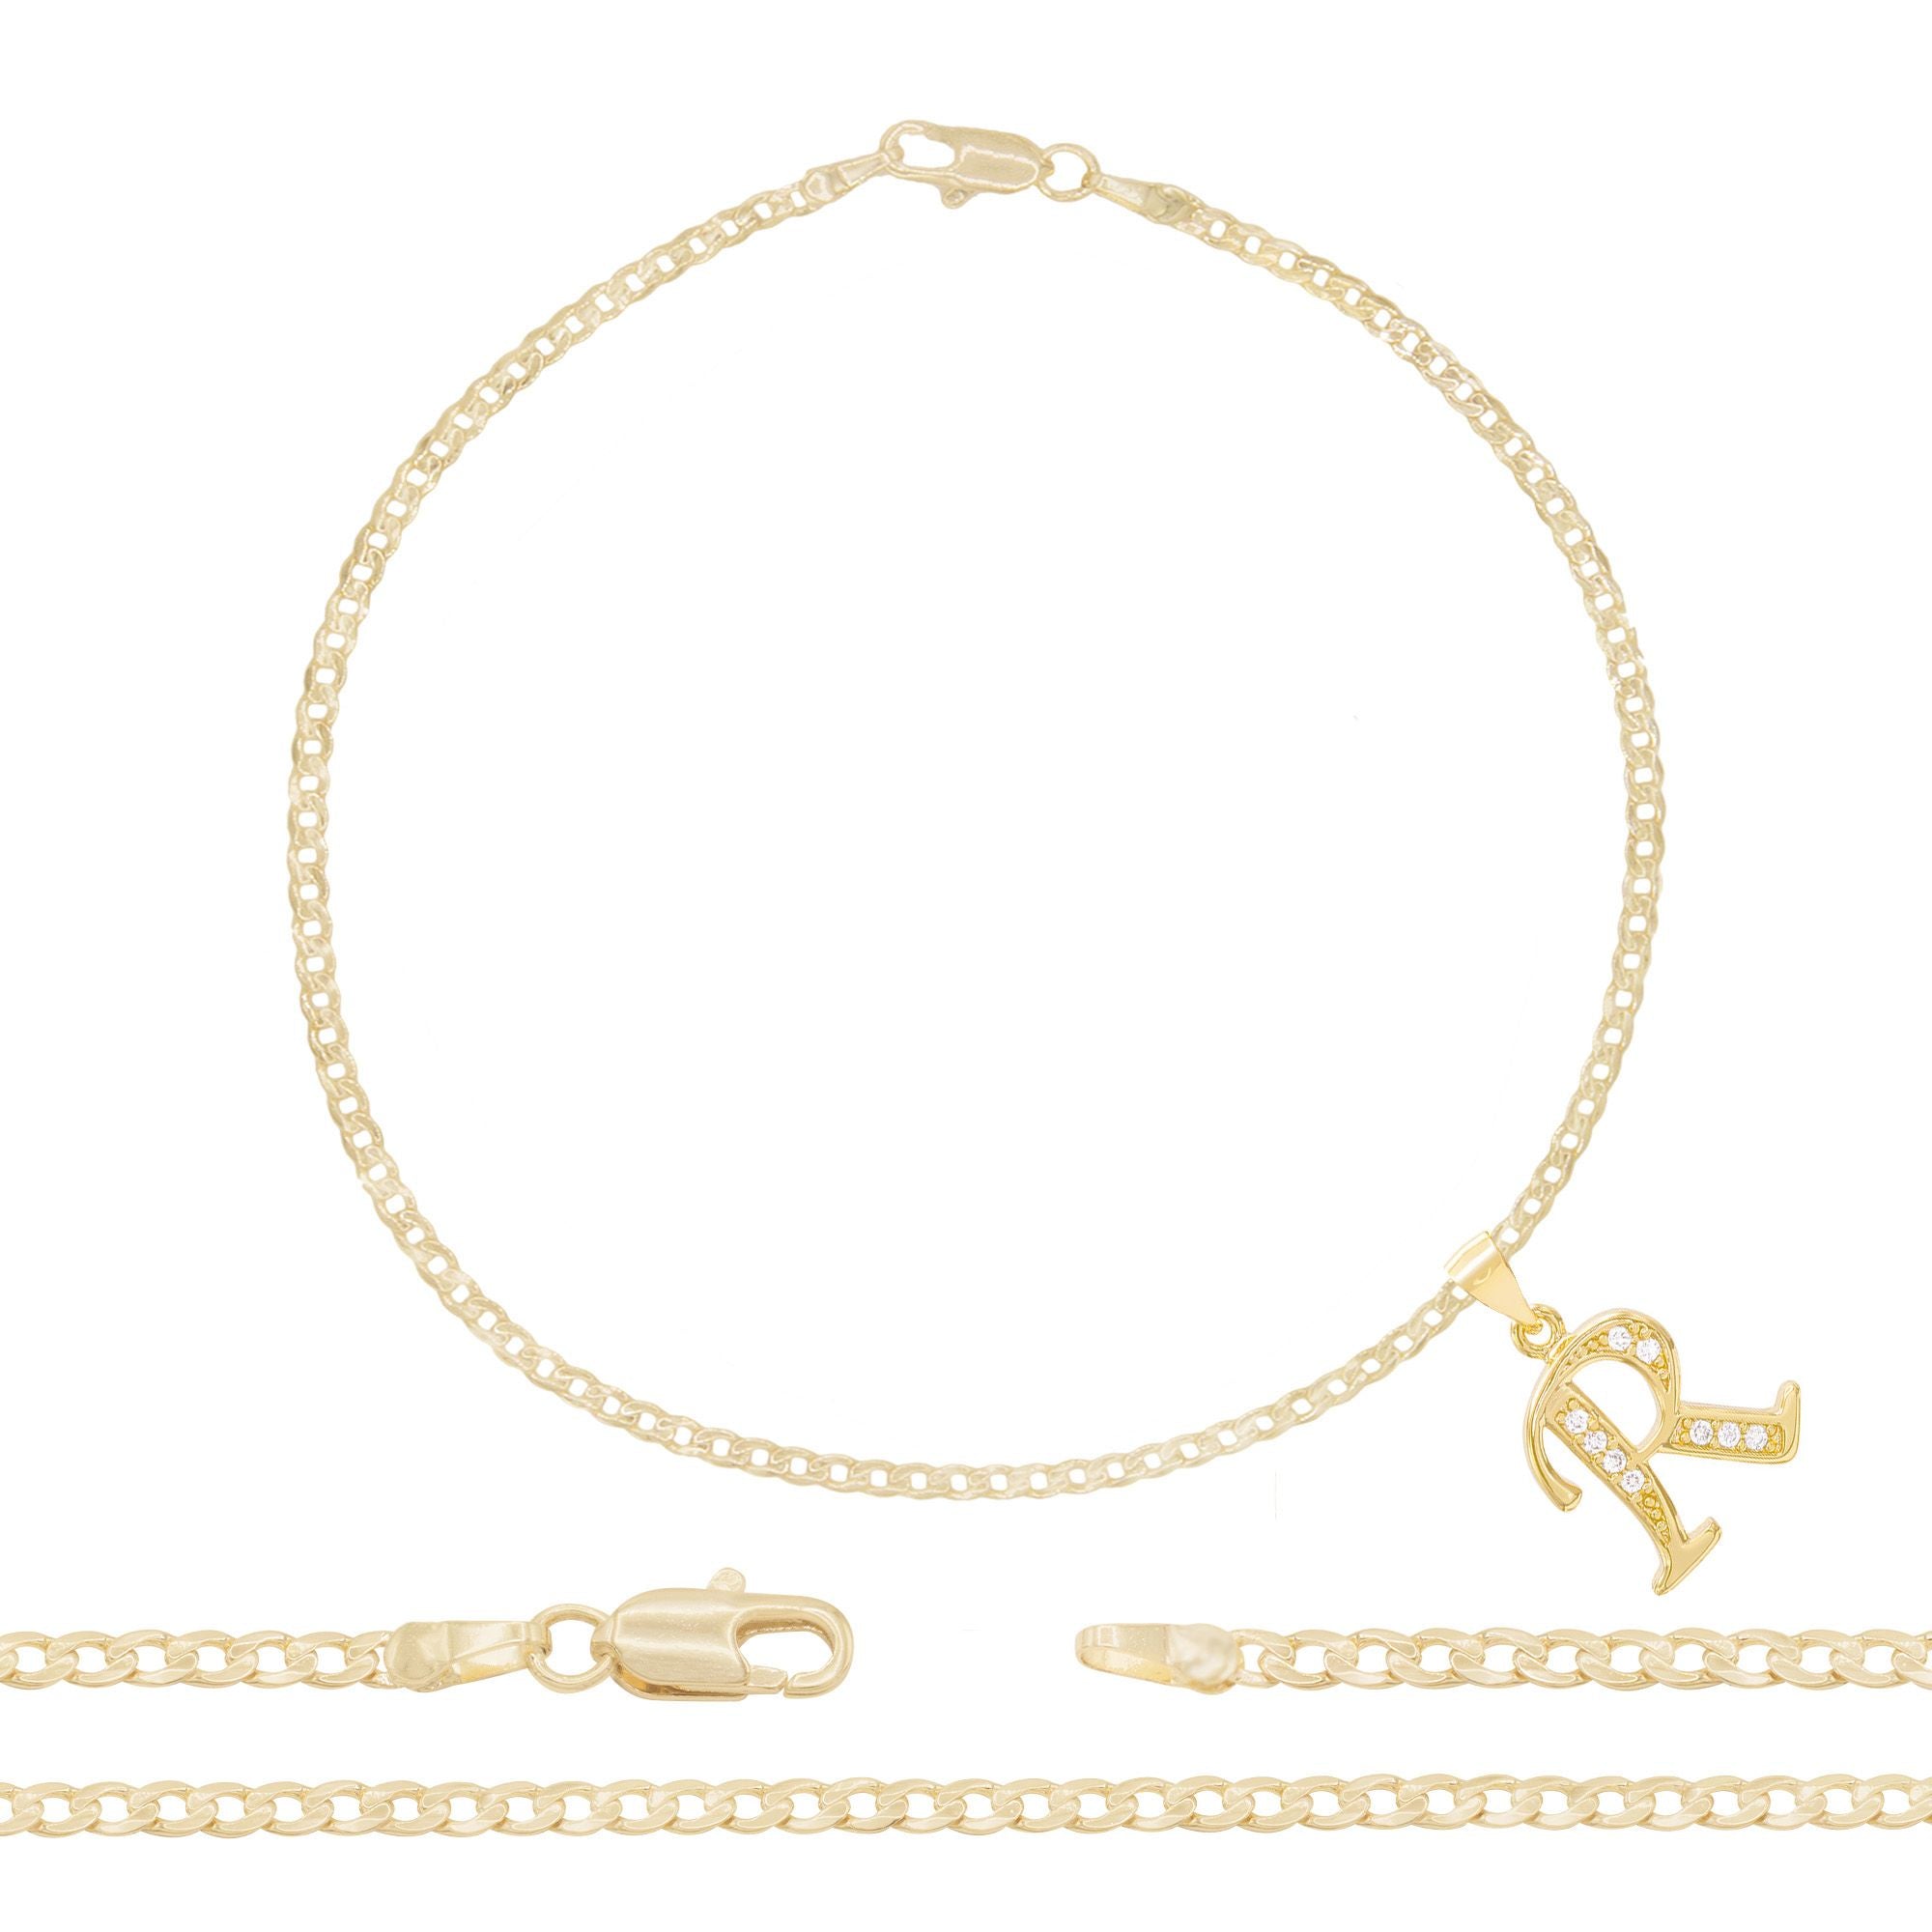 A-Z Initial Letter Pendant 14K Gold Filled Cubic Zirconia Curb Chain Anklet 10" Set 2.5 mm  Women Jewelry